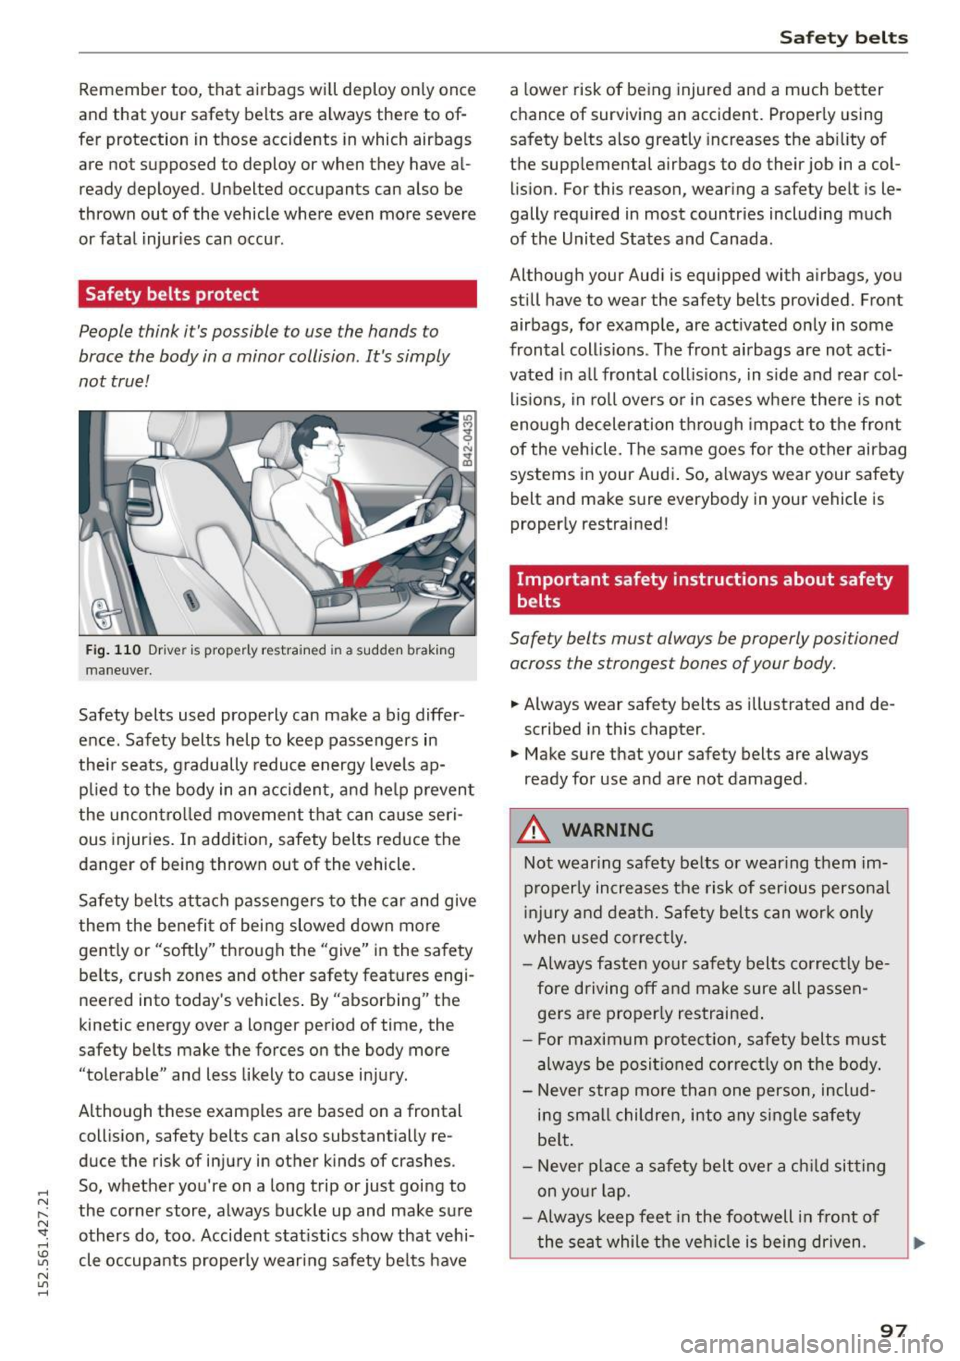 AUDI R8 SPYDER 2015  Owners Manual .... N 
l­
N "1: .... I.O 
" N 
" .... 
Remember  too,  that  airbags  will  deploy  only once 
and  that  your  safety  belts  are  always  there  to  of­
fer  protection  in those  accidents  i